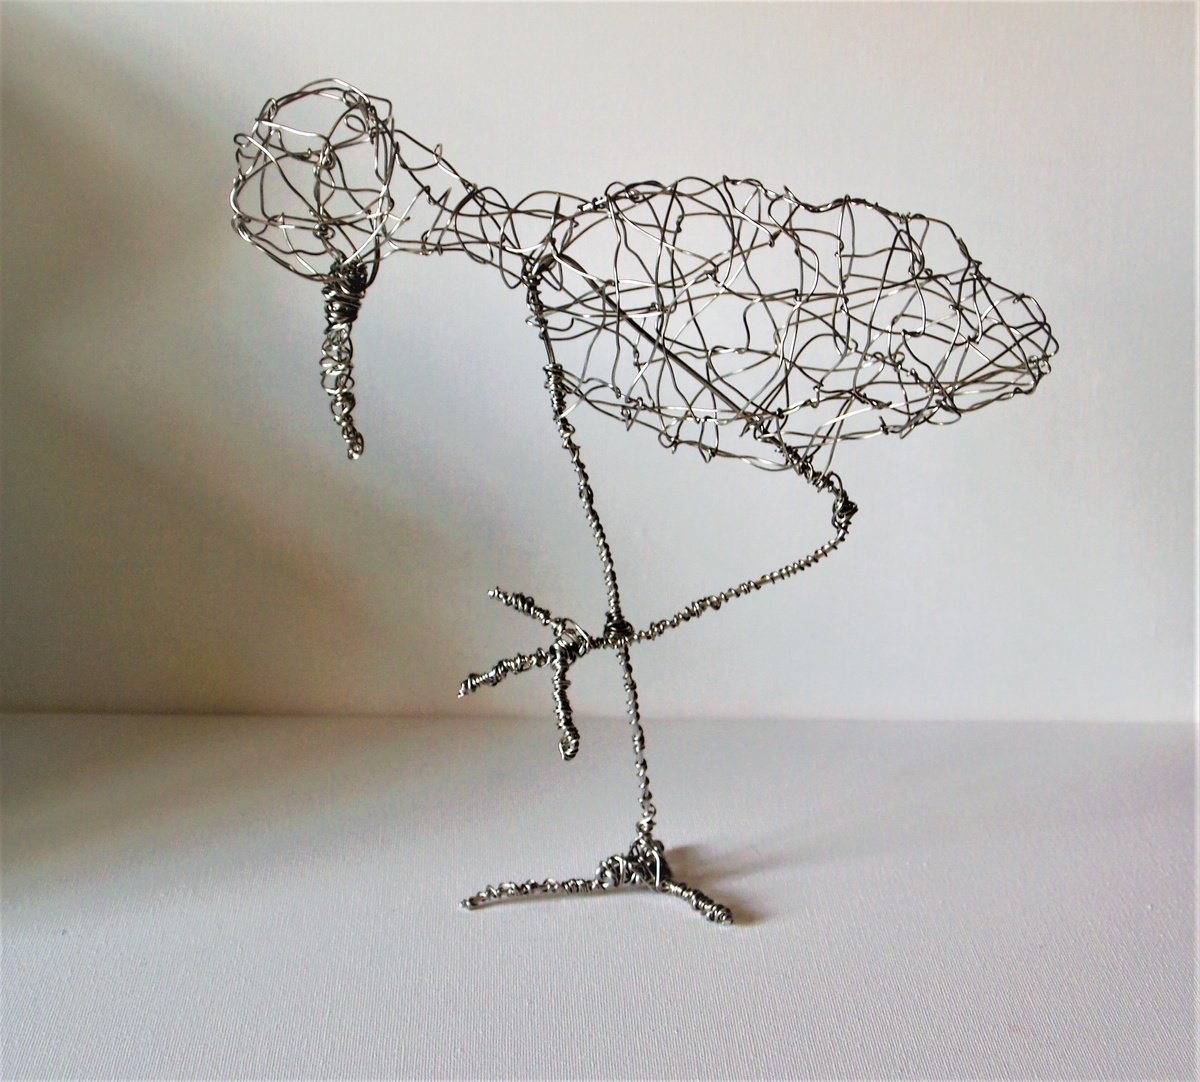 Silver wire Steve Stork Sculpture by Steph Morgan